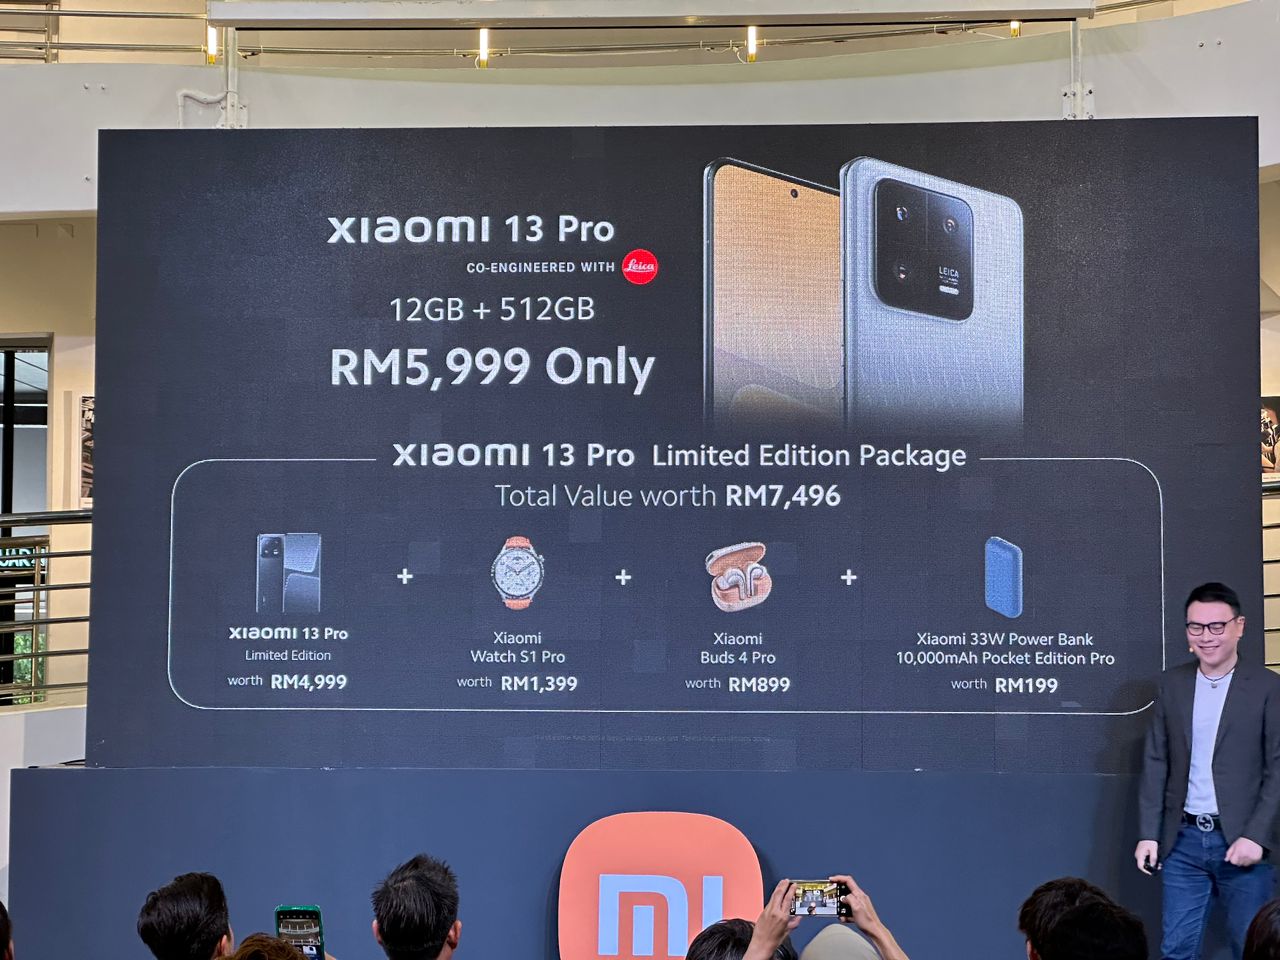 Xiaomi Robot Vacuum E10, S10 series & X10 series Malaysia release -  starting price from RM899